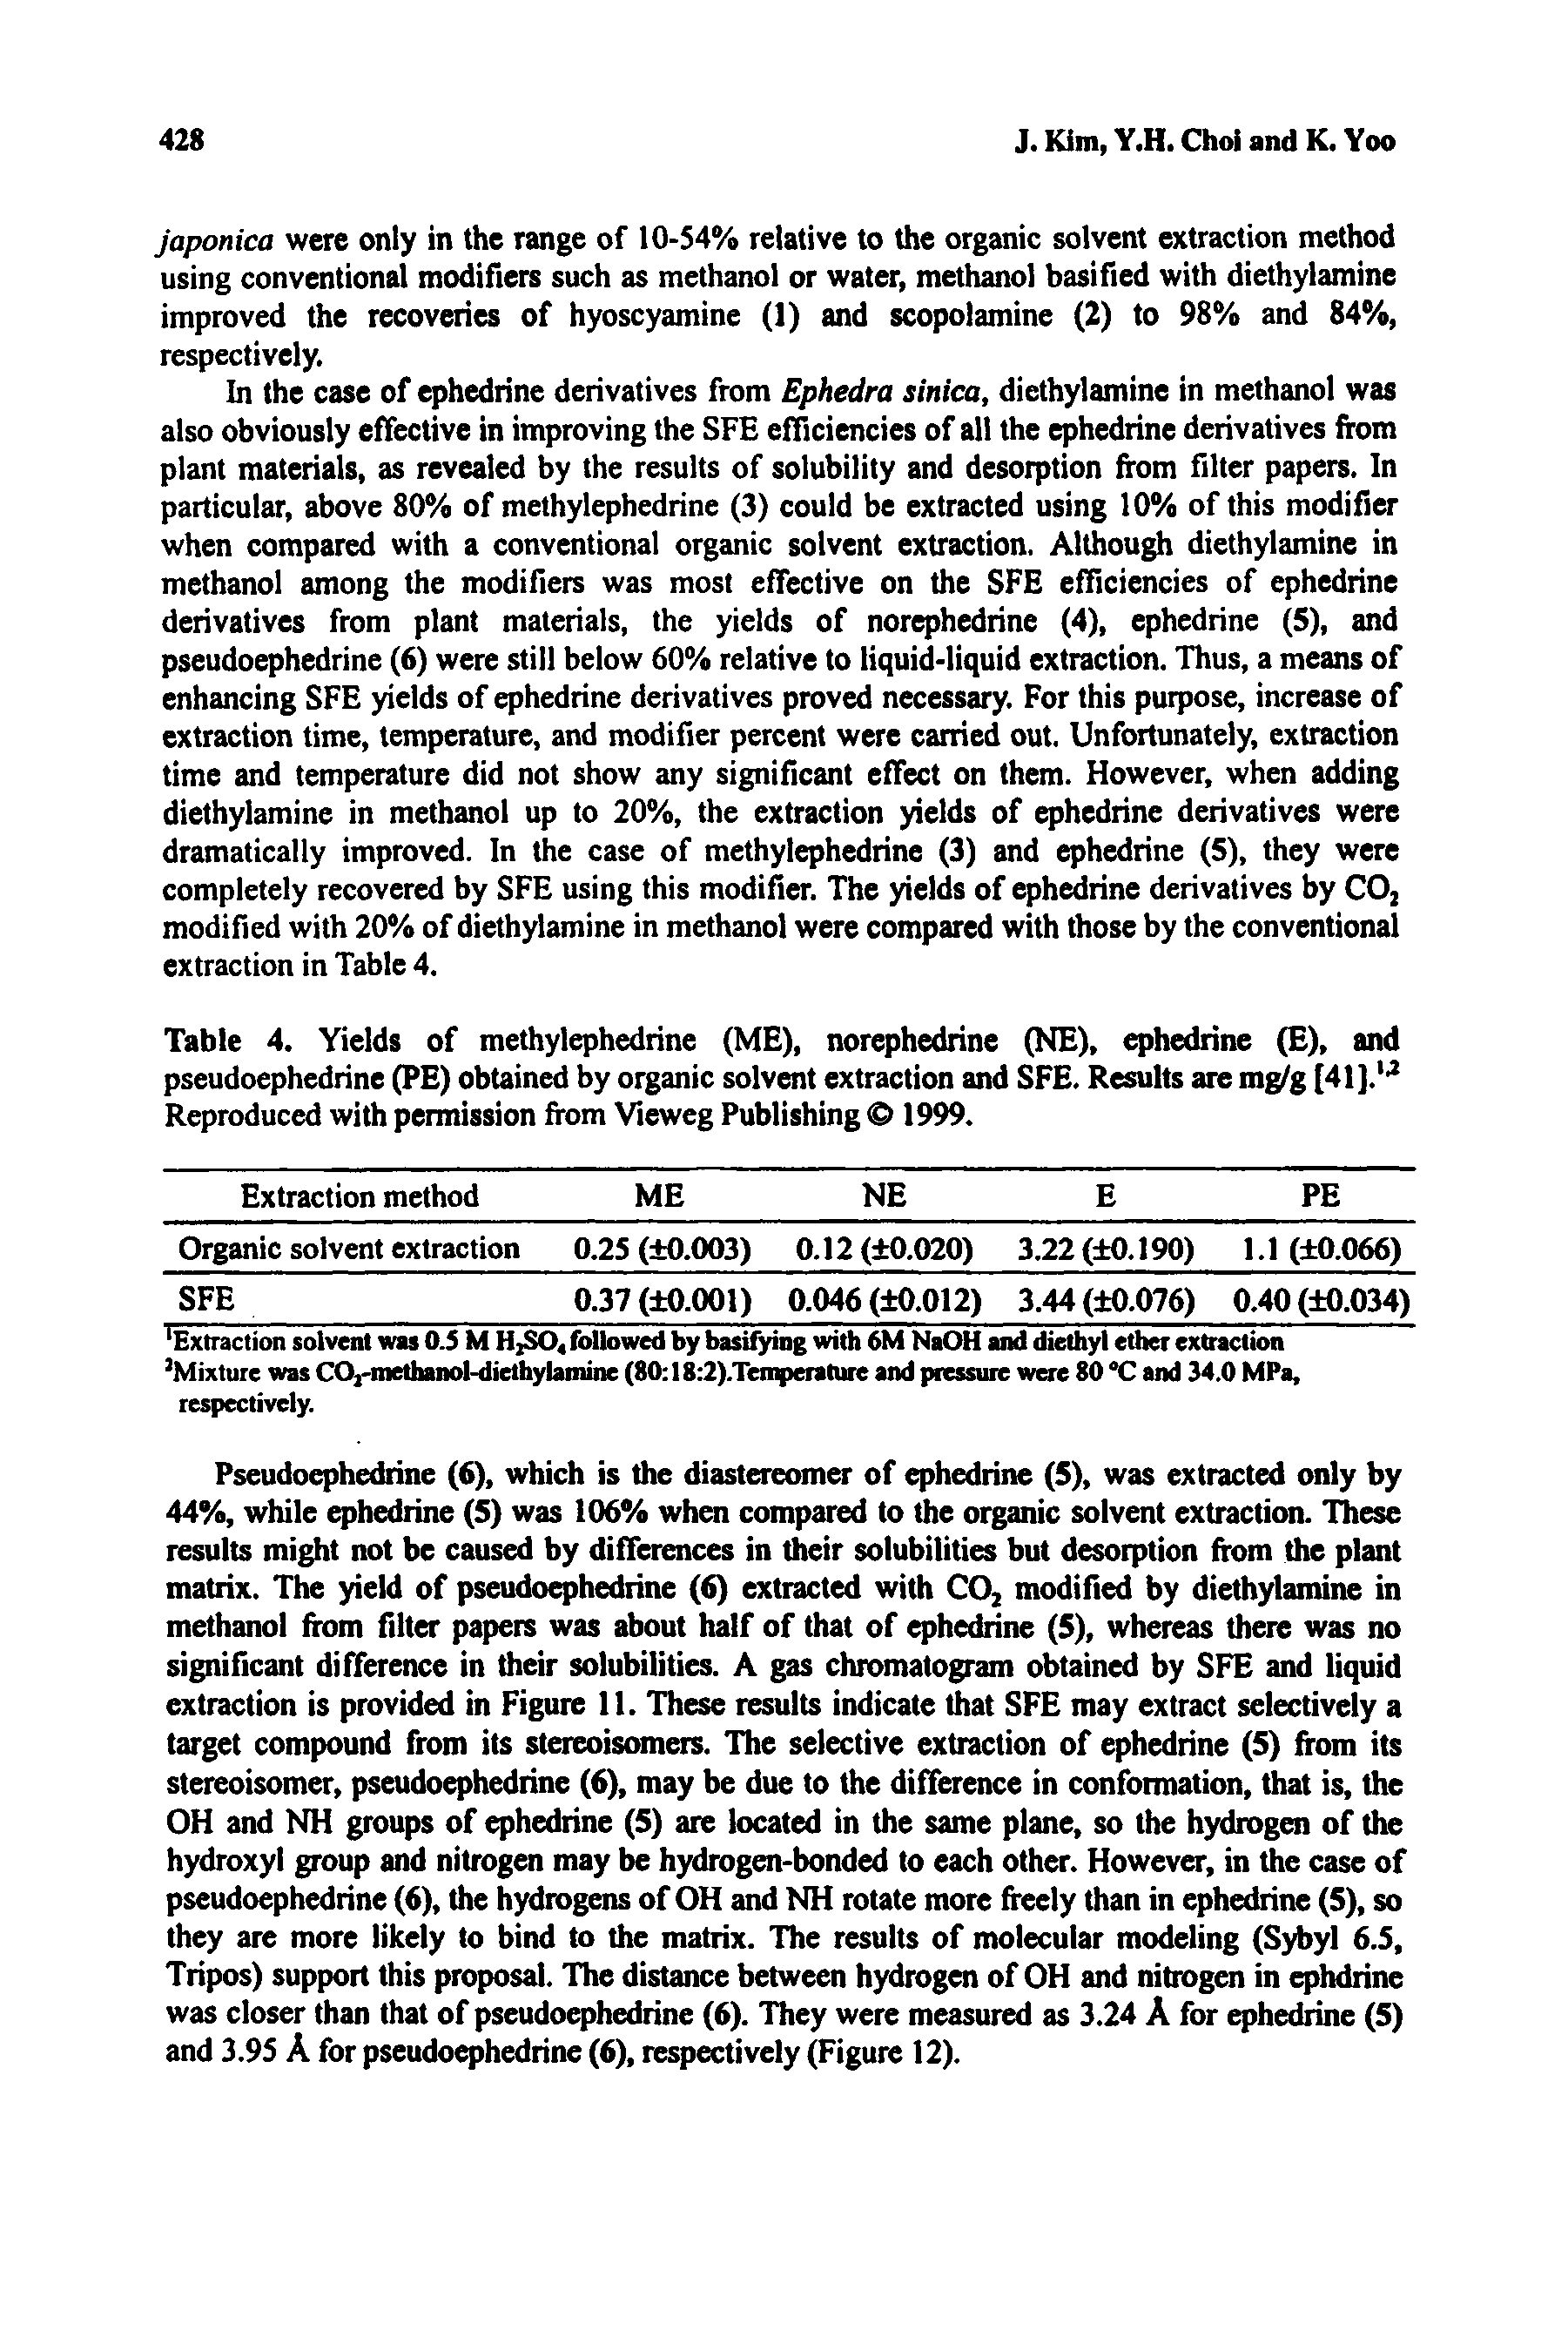 Table 4. Yields of methylephedrine (ME), norephedrine (NE), ephedrine (E), and pseudoephedrine (PE) obtained by organic solvent extraction and SFE. Results are mg/g [41].u Reproduced with permission from Vieweg Publishing 1999.